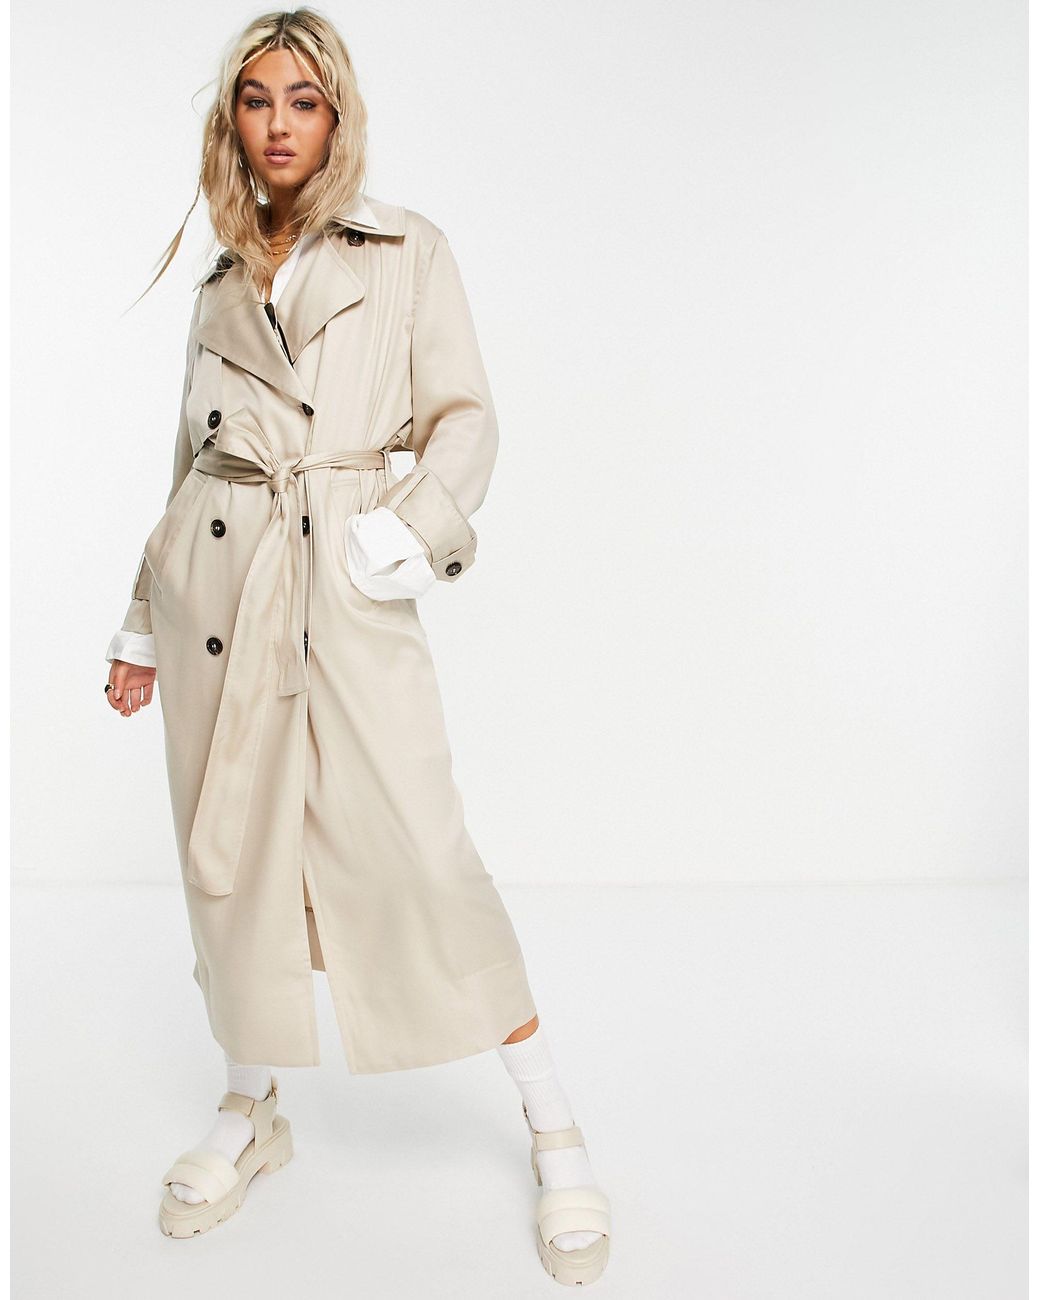 Weekday Cassidy Trench Coat in White | Lyst UK